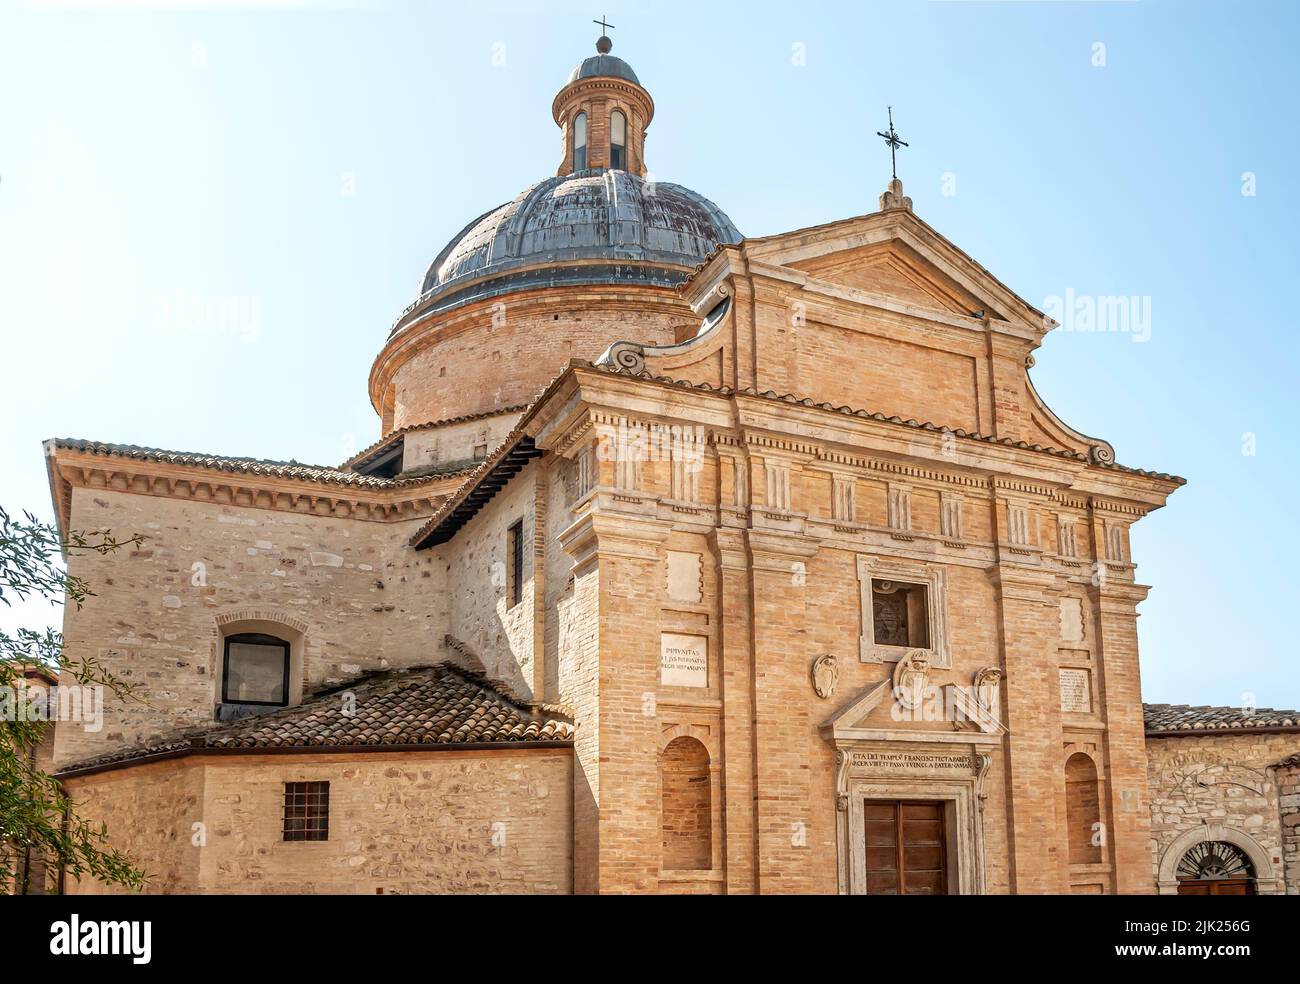 Chiesa Nuova in Assisi, Italy, built in 1615 on the site of the presumed birthplace of St. Francis. Stock Photo